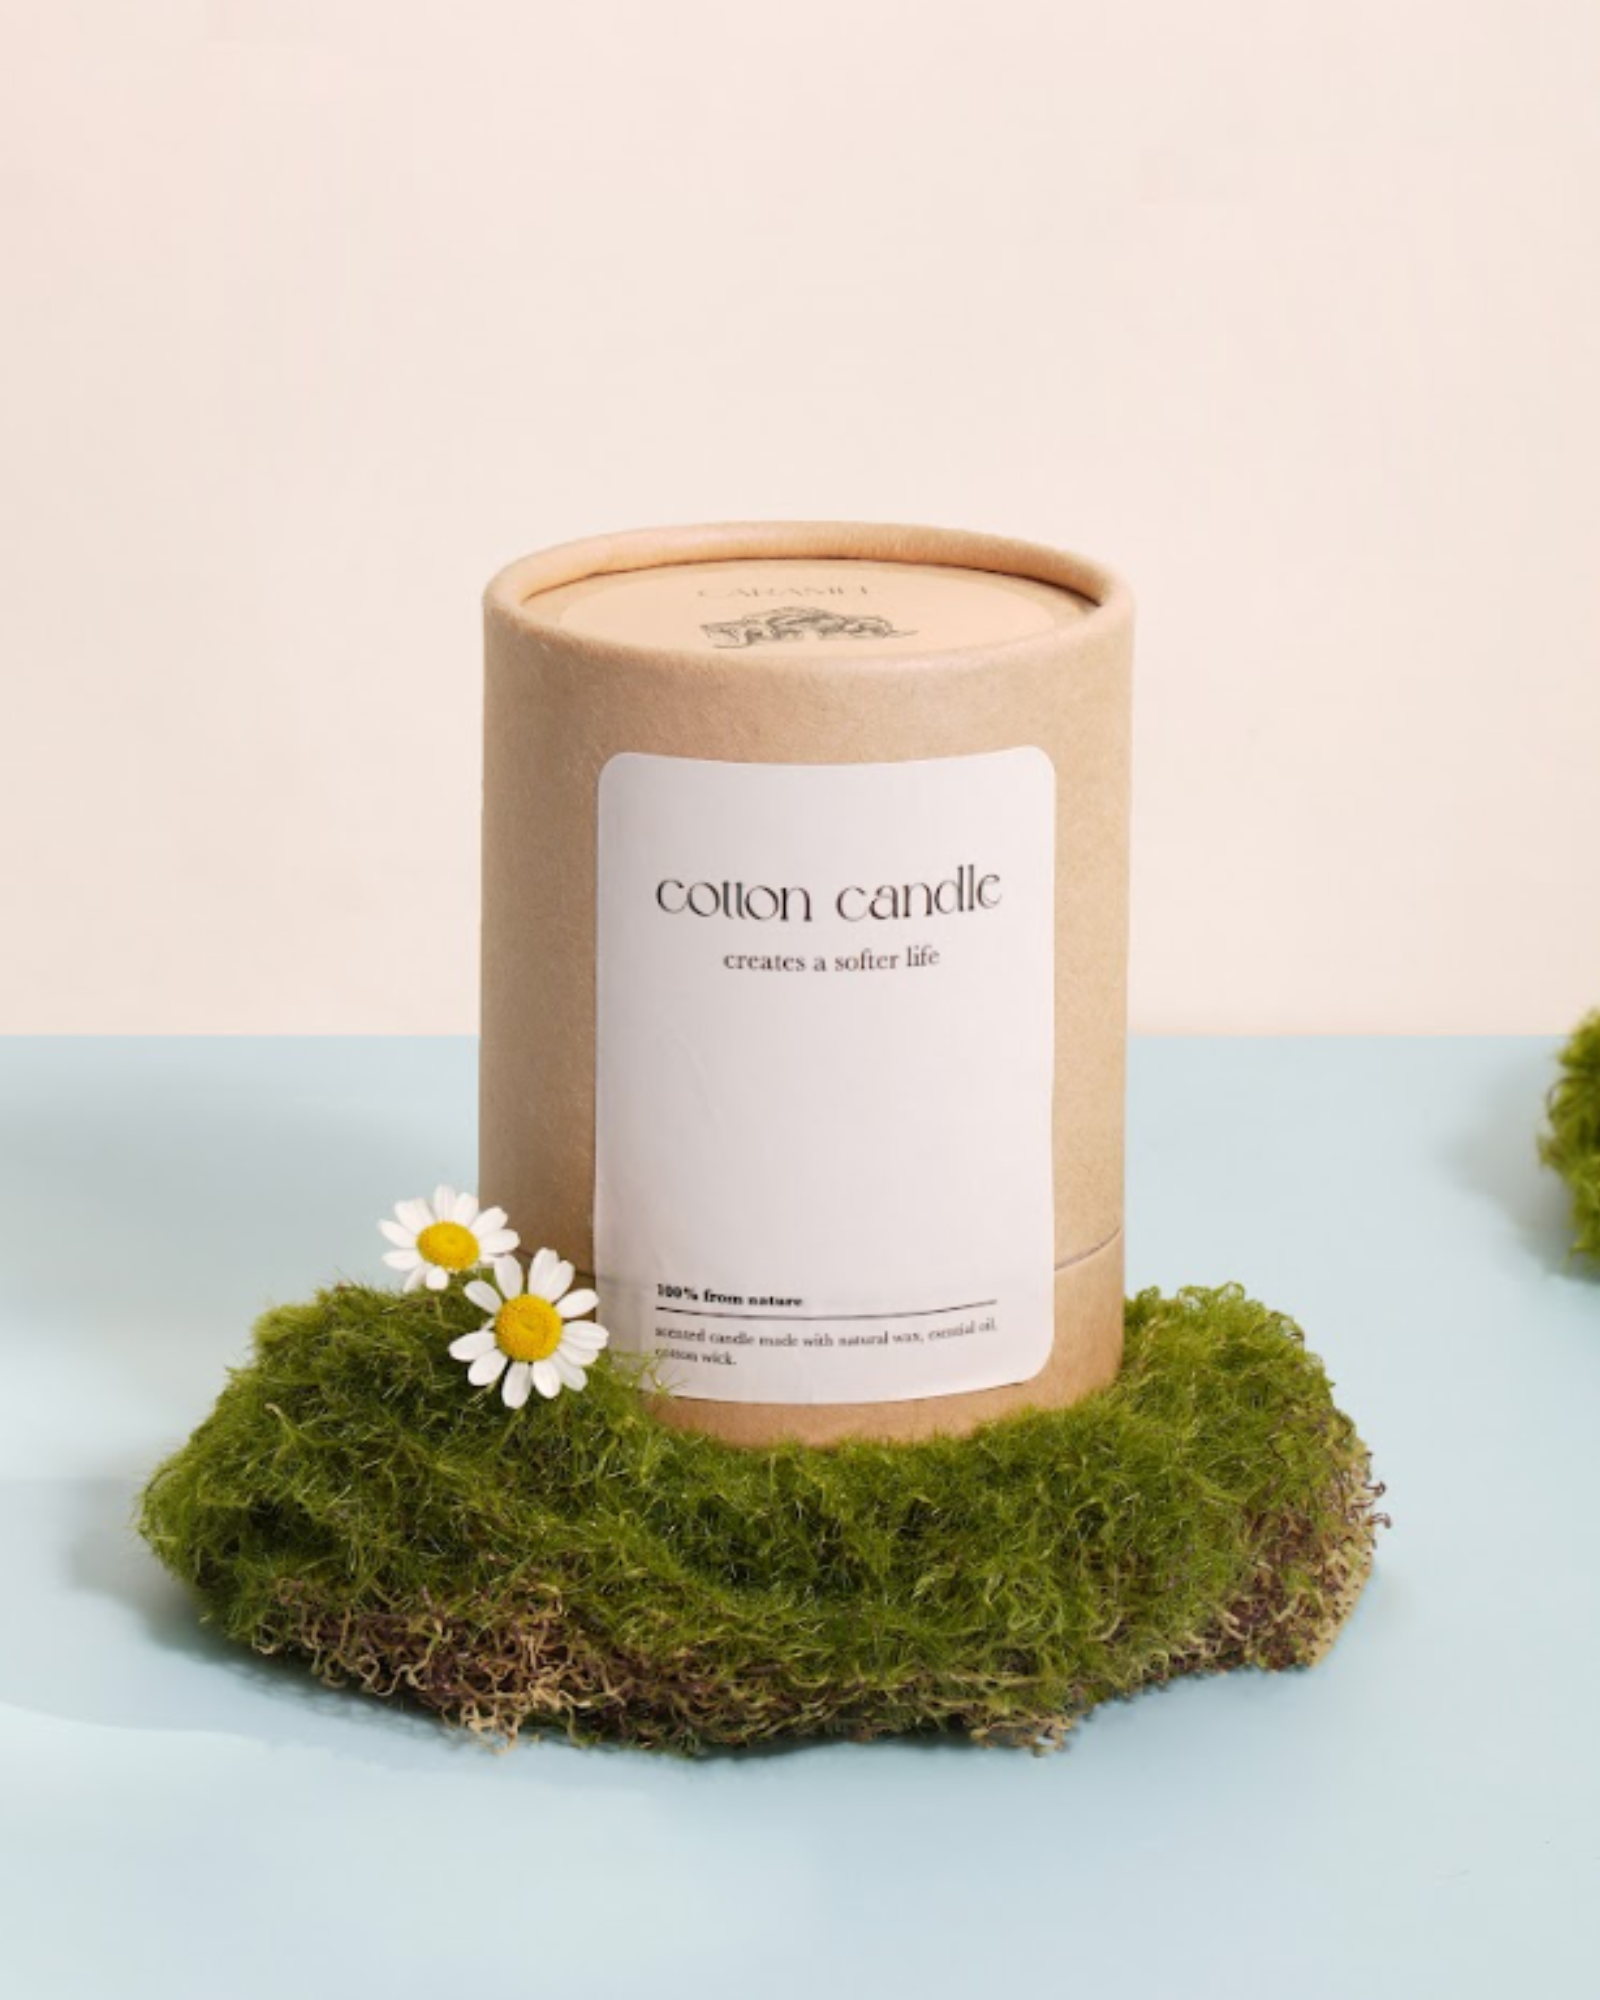  COTTON CANDLE - S 